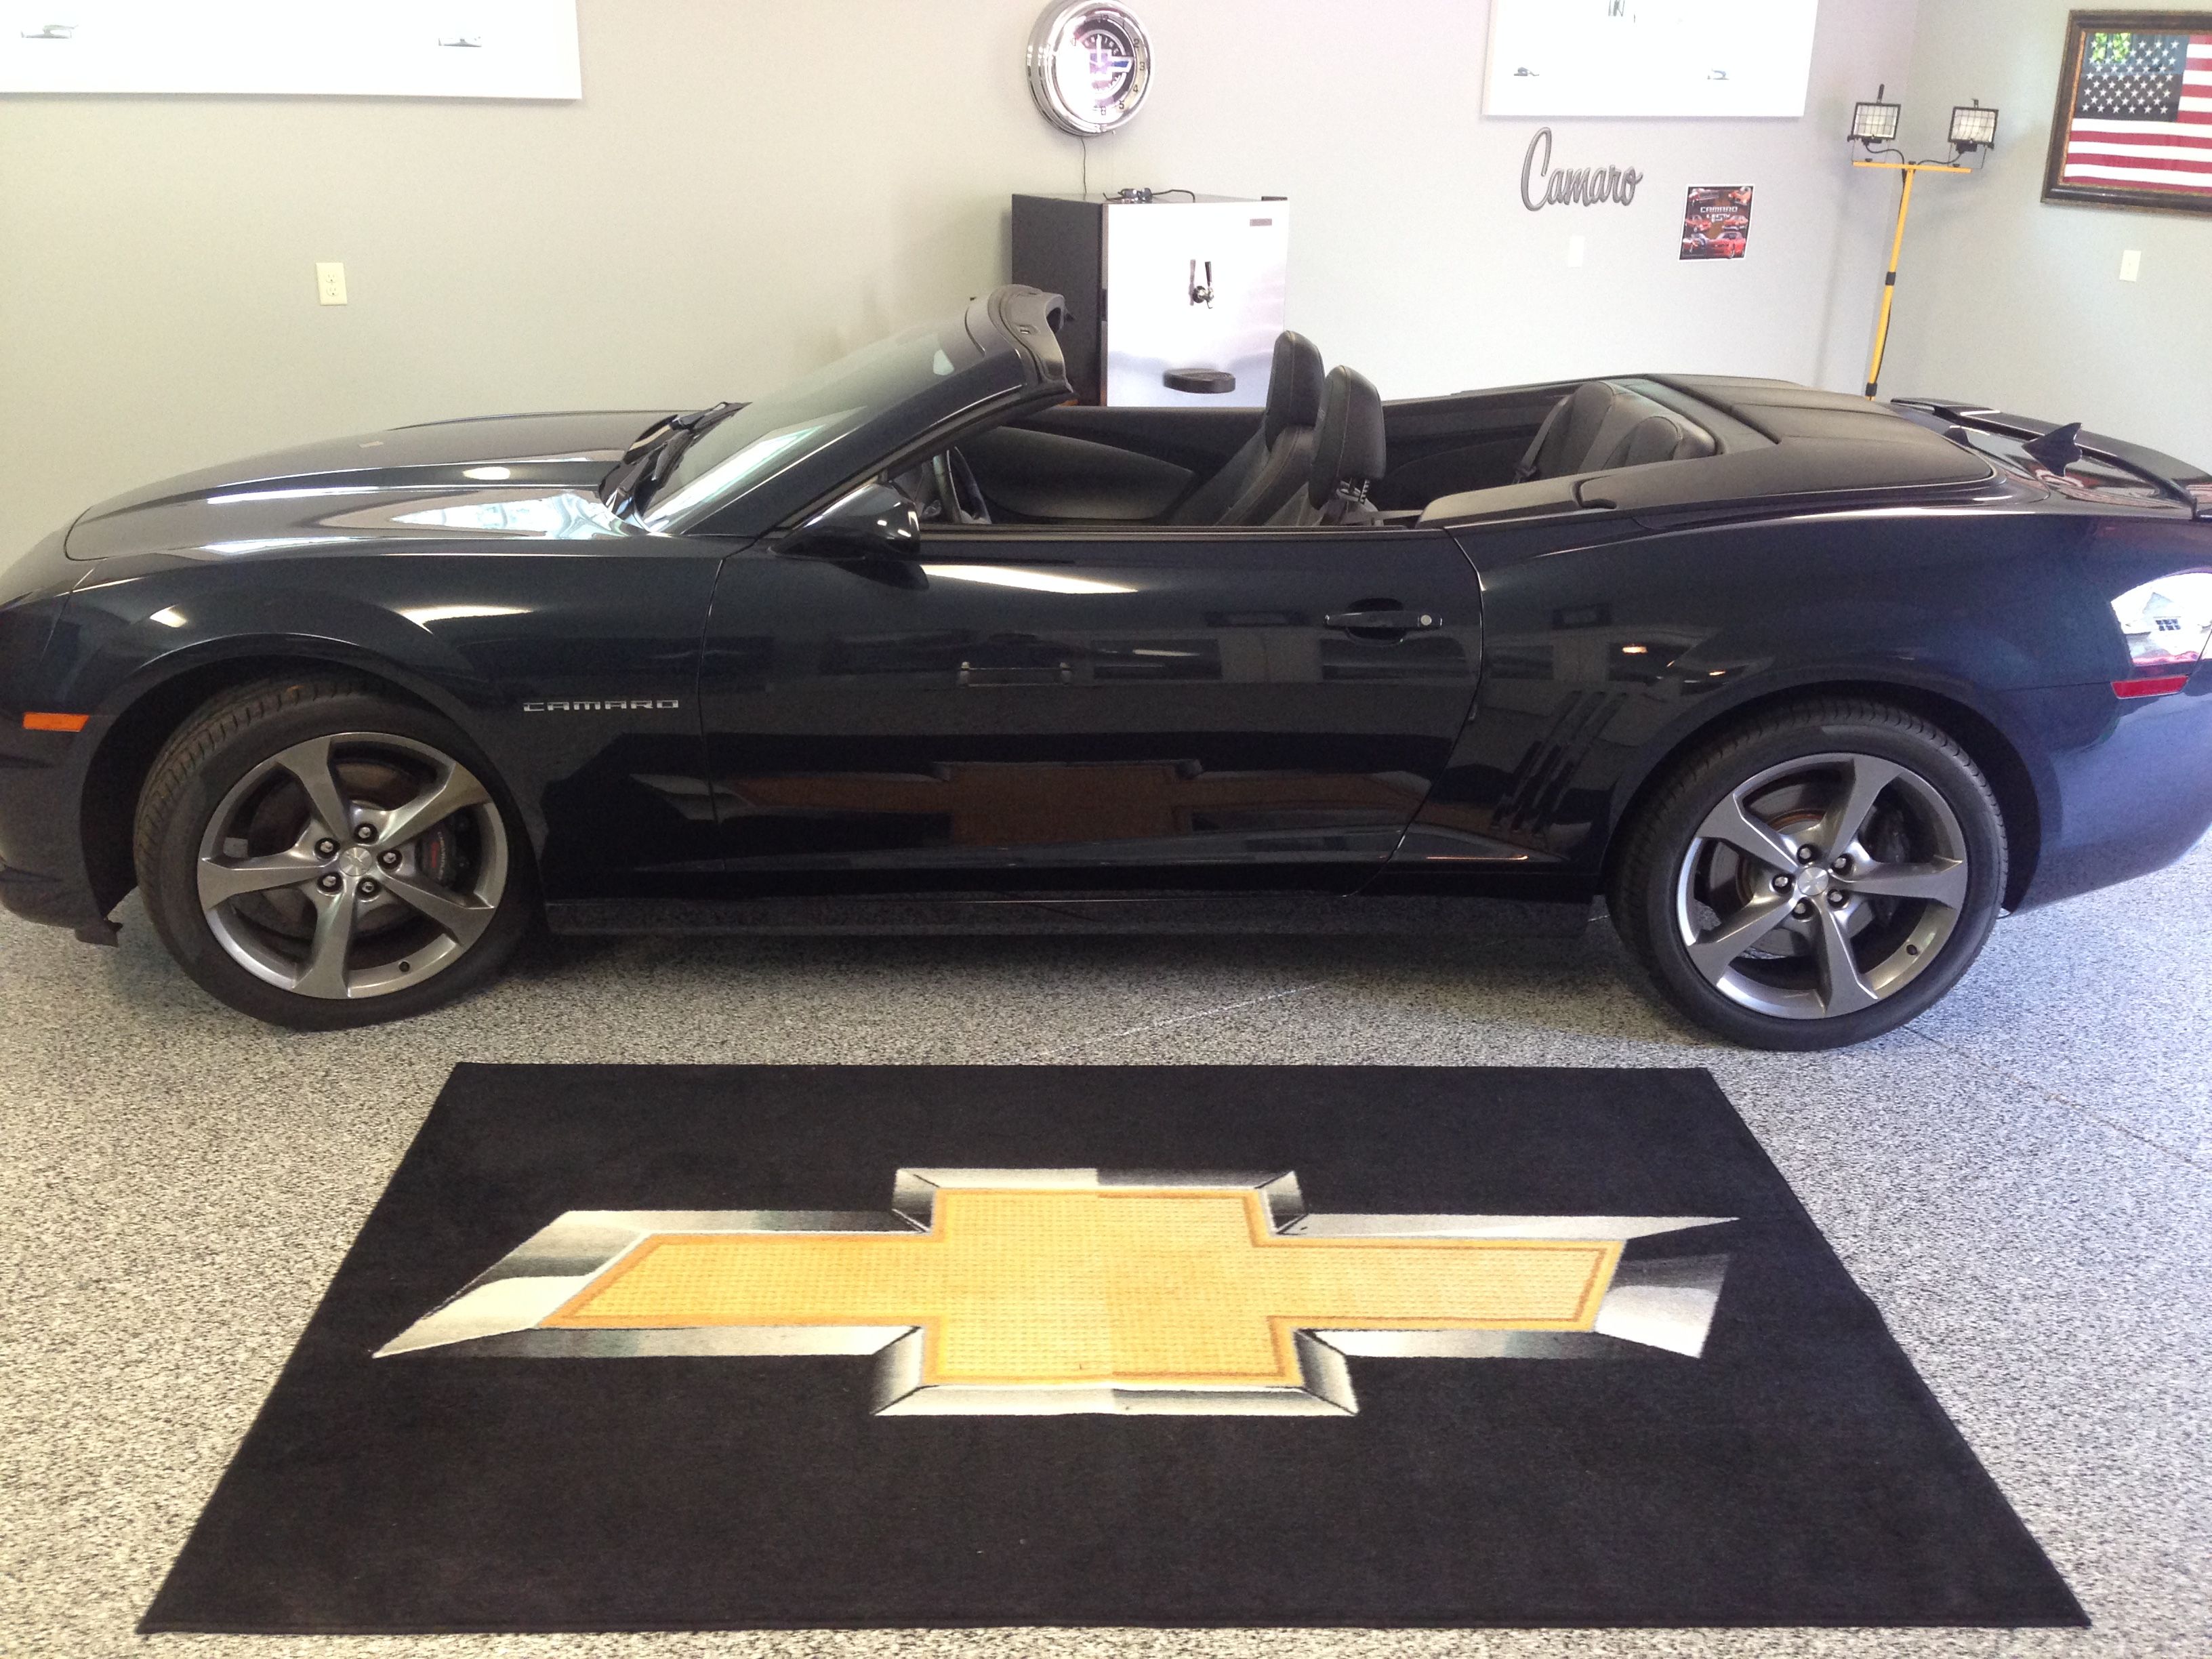 Chevy Logo Rug made for a Special Man Cave